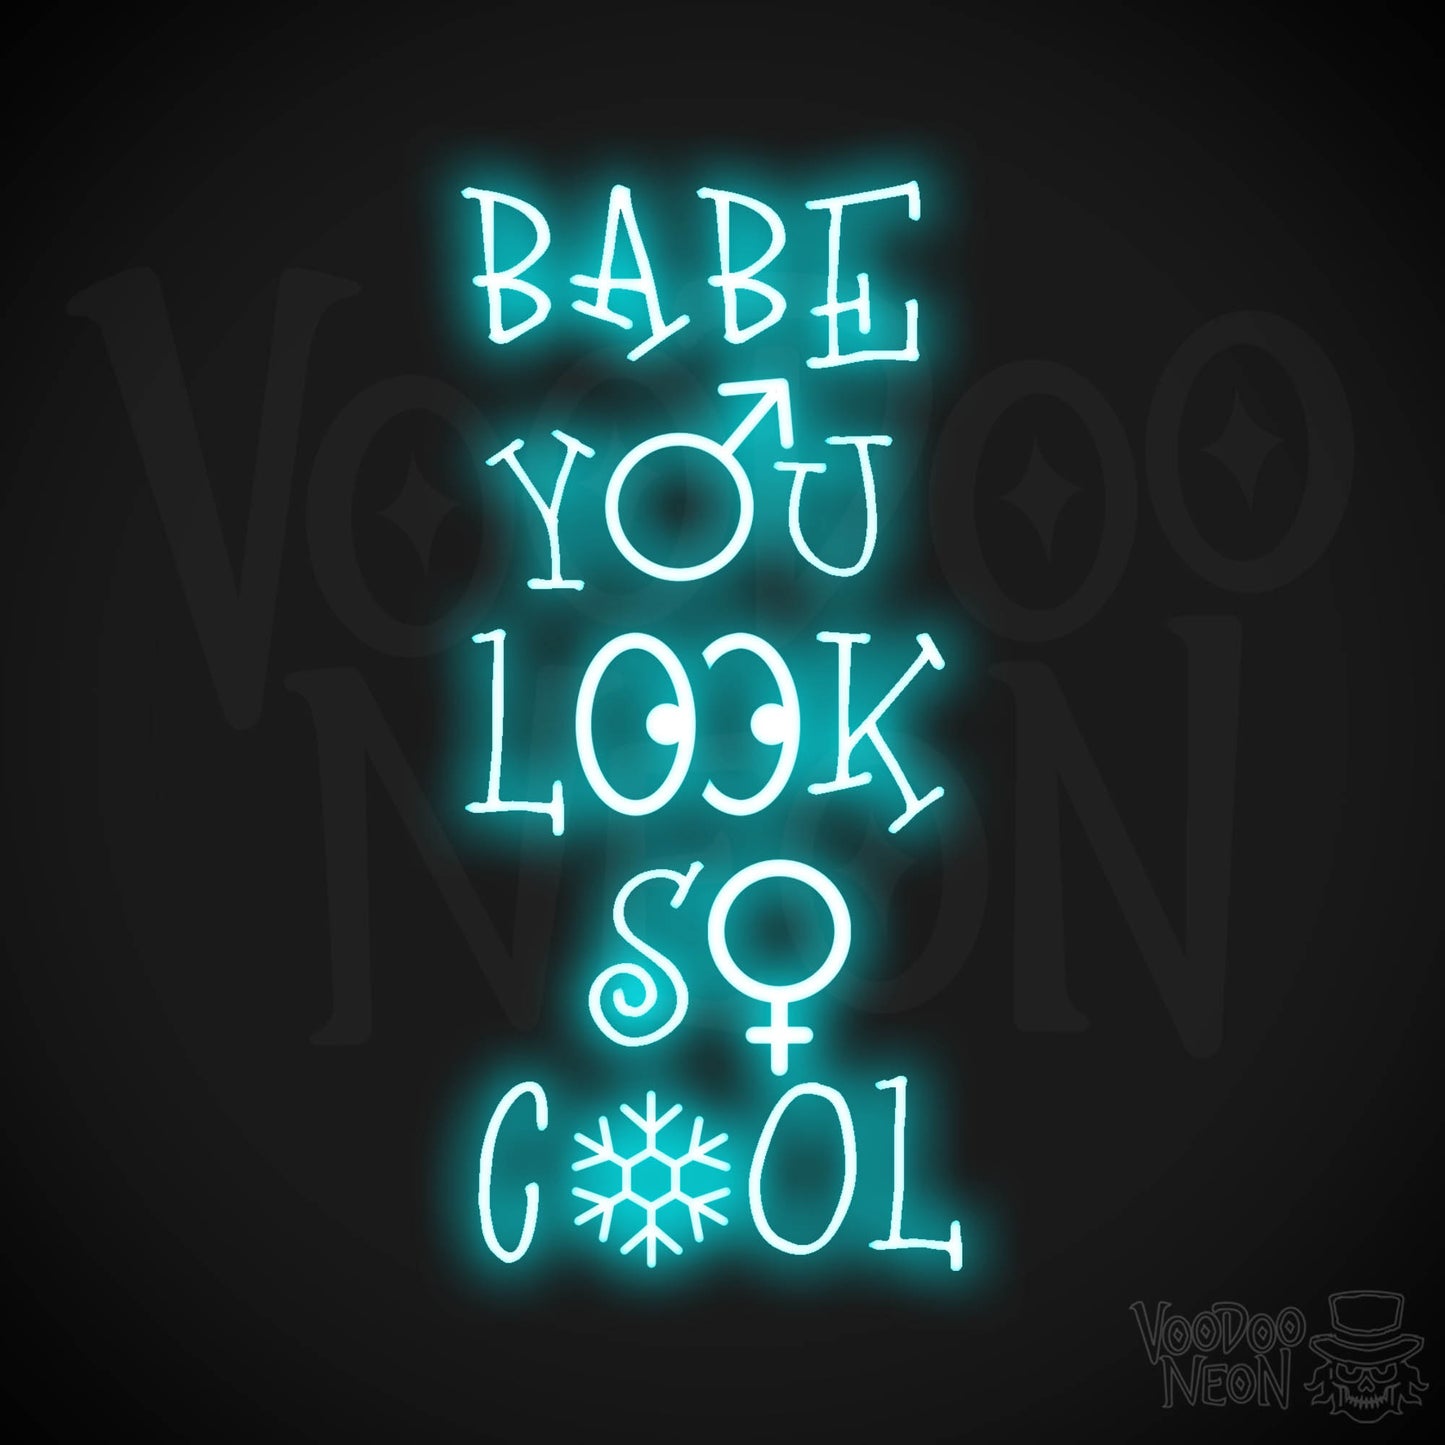 Babe You Look So Cool Neon Sign - LED Wall Art - Color Ice Blue